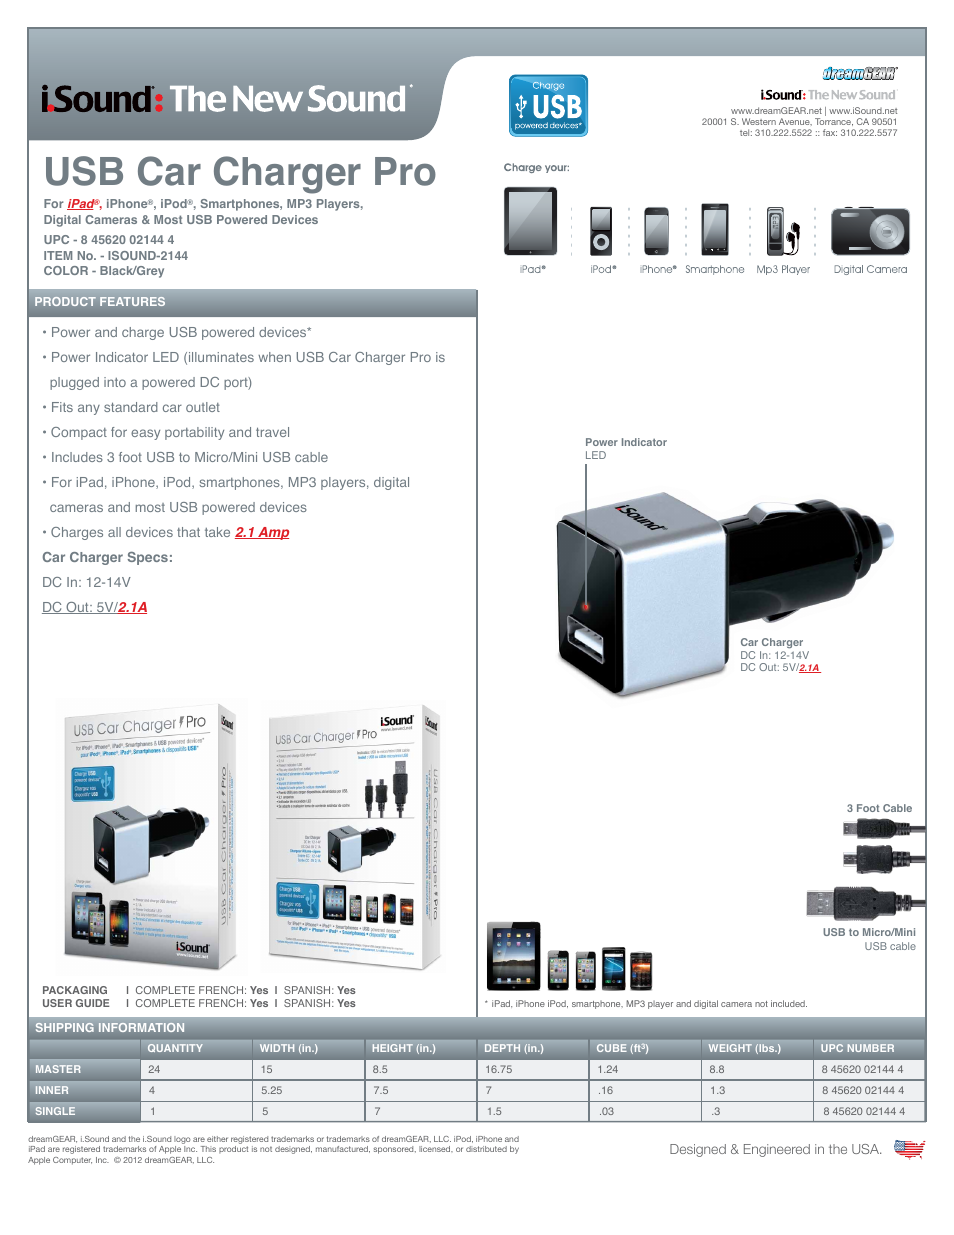 USB Car Charger Pro - Sell Sheet